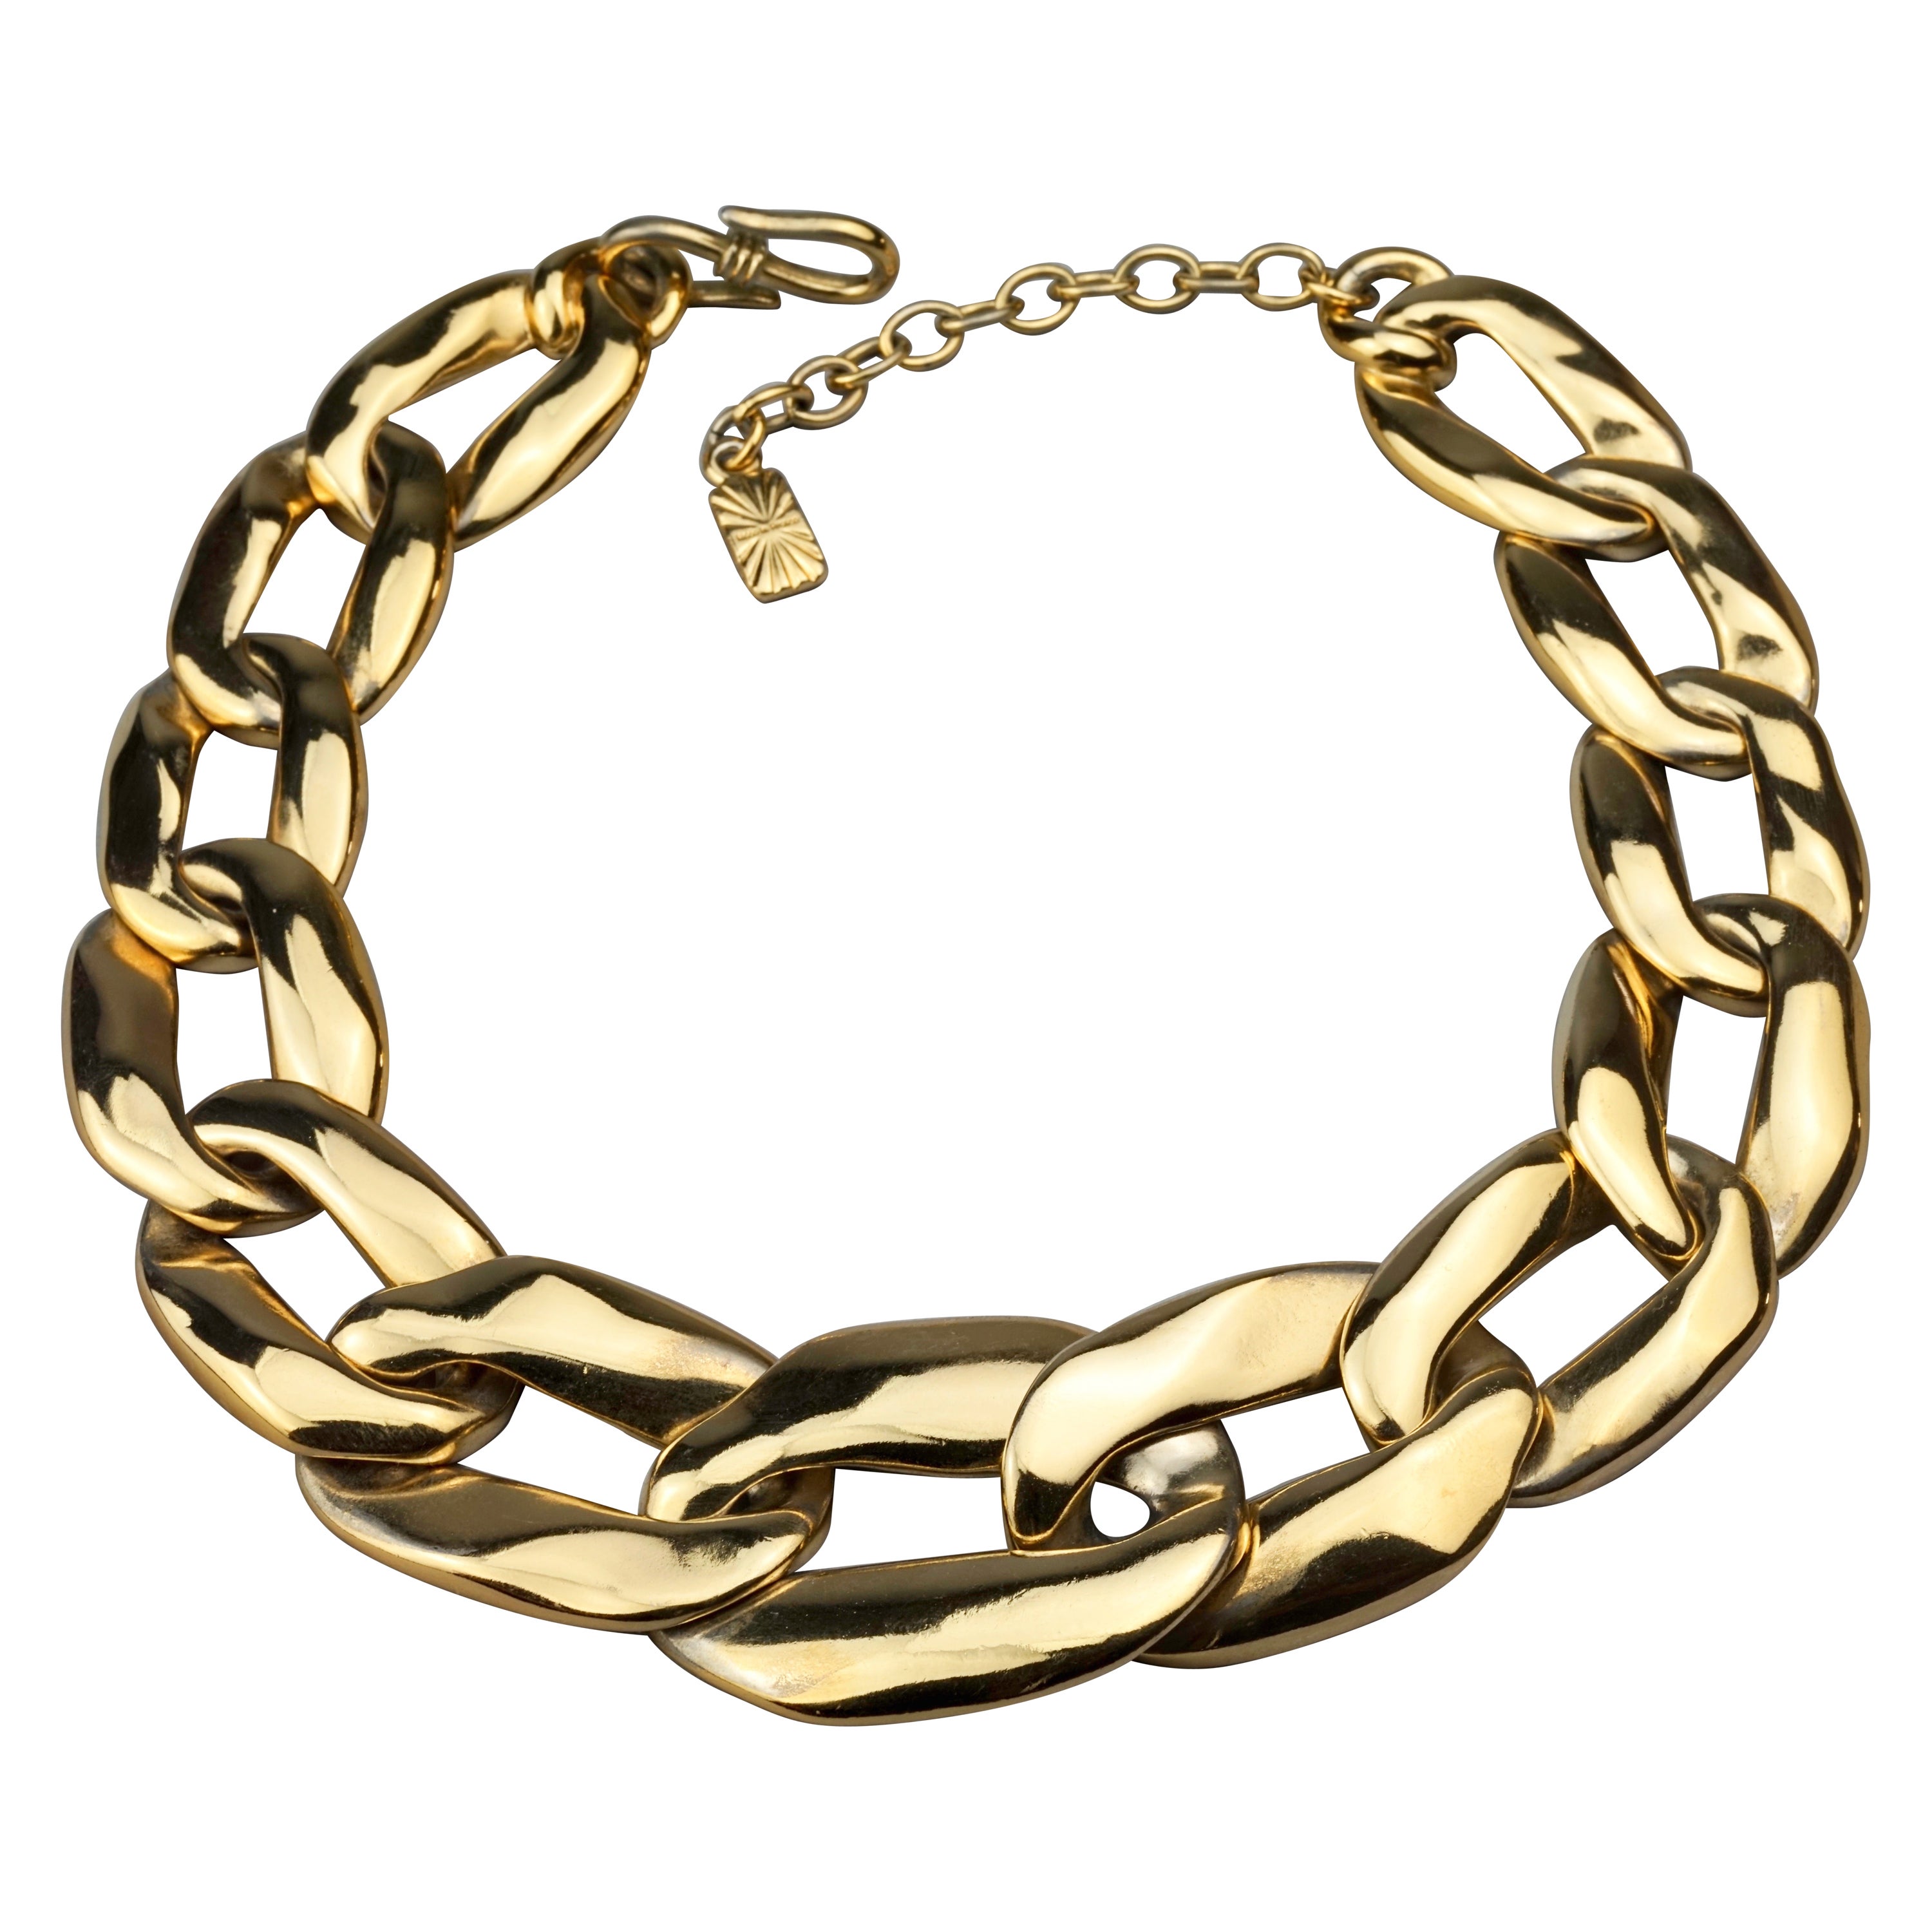 Vintage YVES SAINT LAURENT Ysl by Robert Goossens Chunky Chain Links Necklace